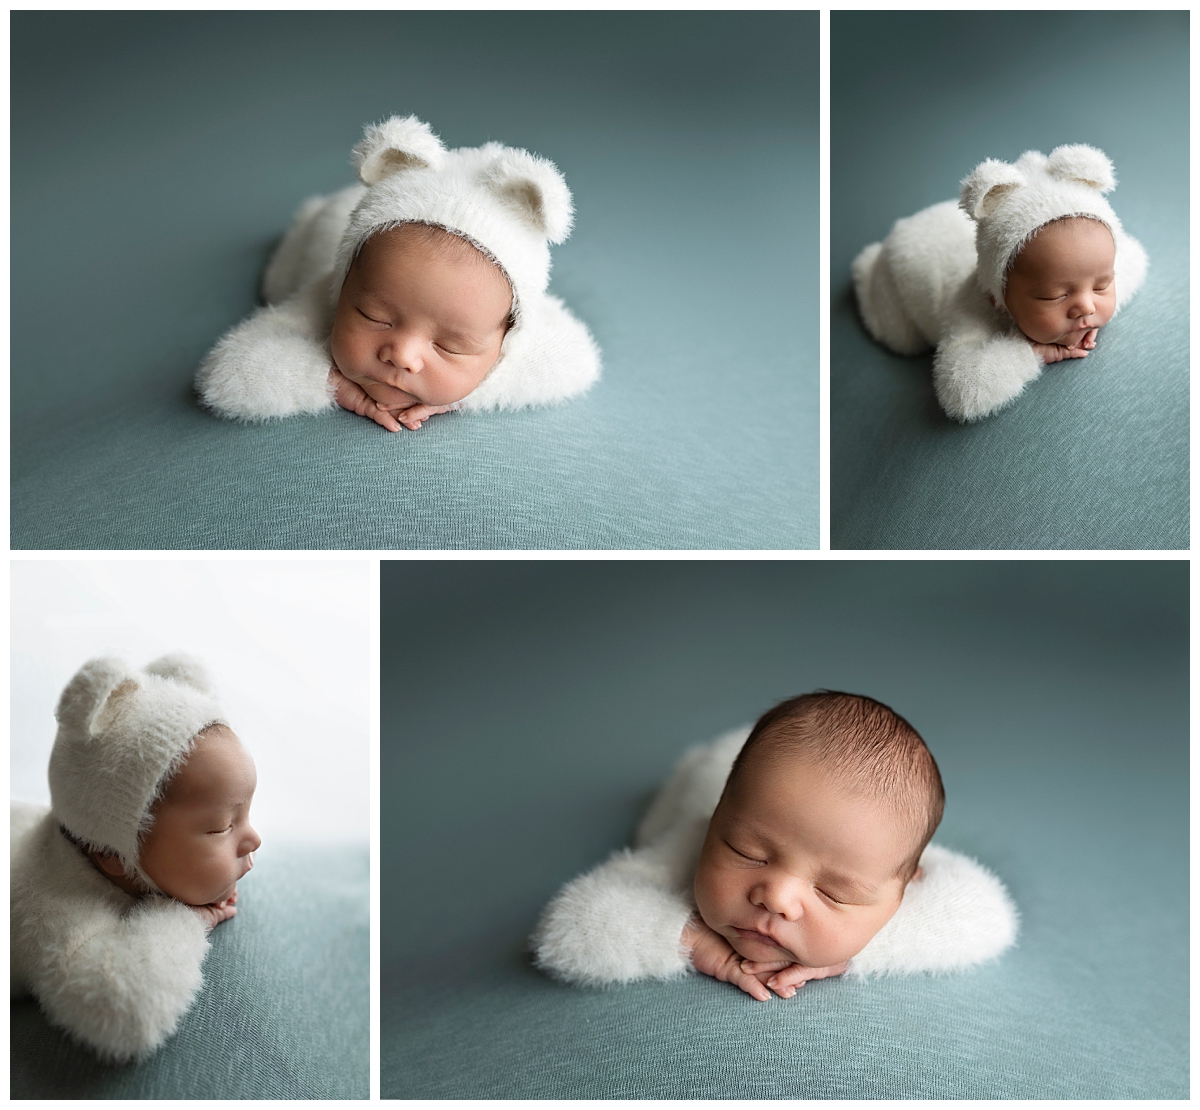 White bear outfit on newborn boy during his newborn photography session.